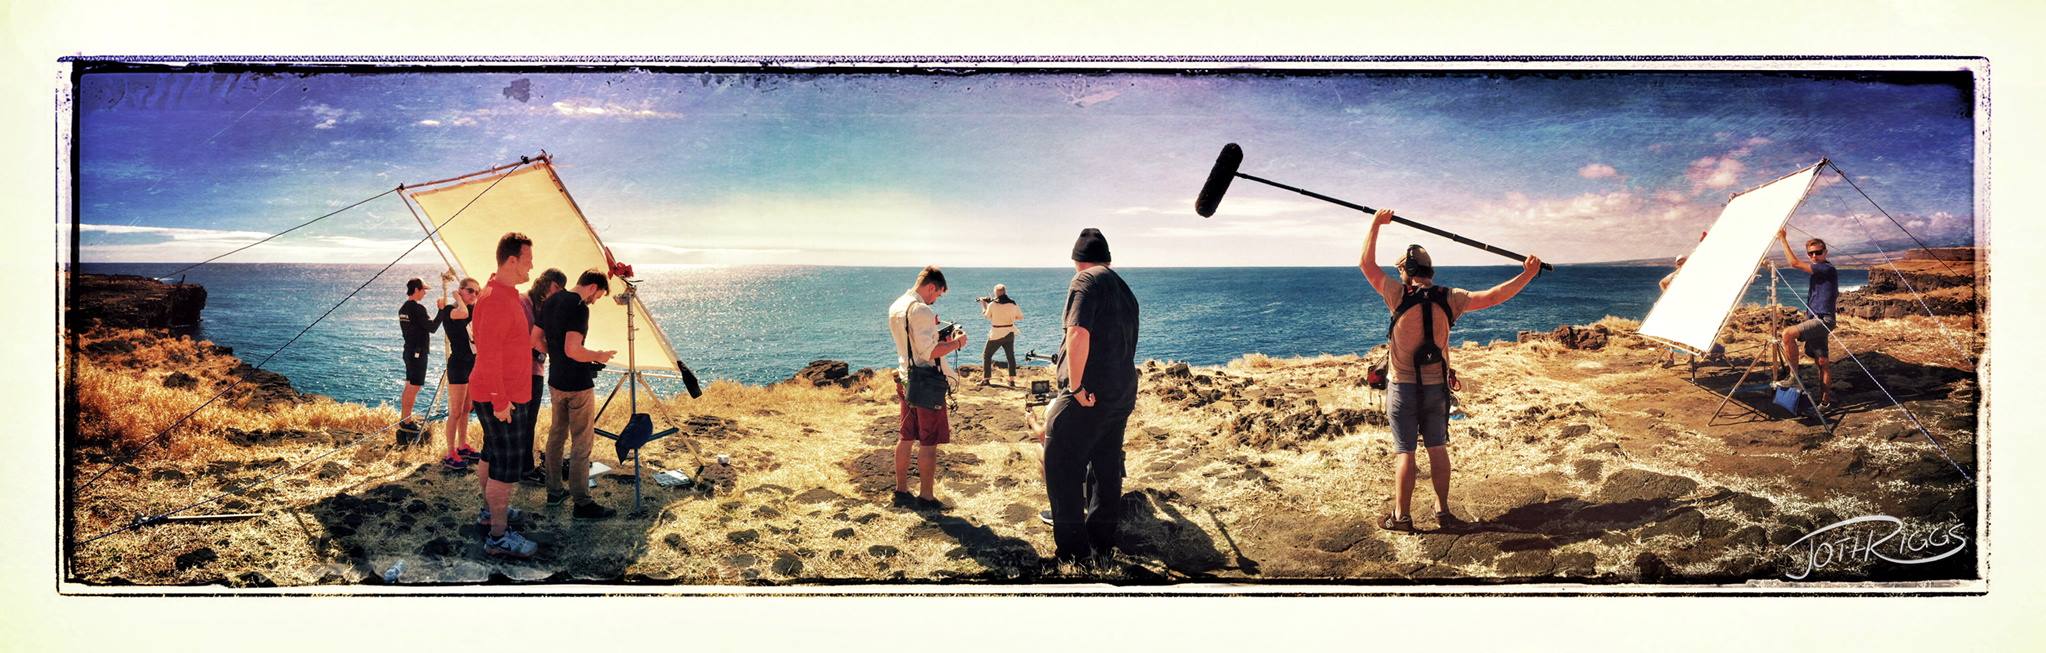 On set in Hawaii for my film, 